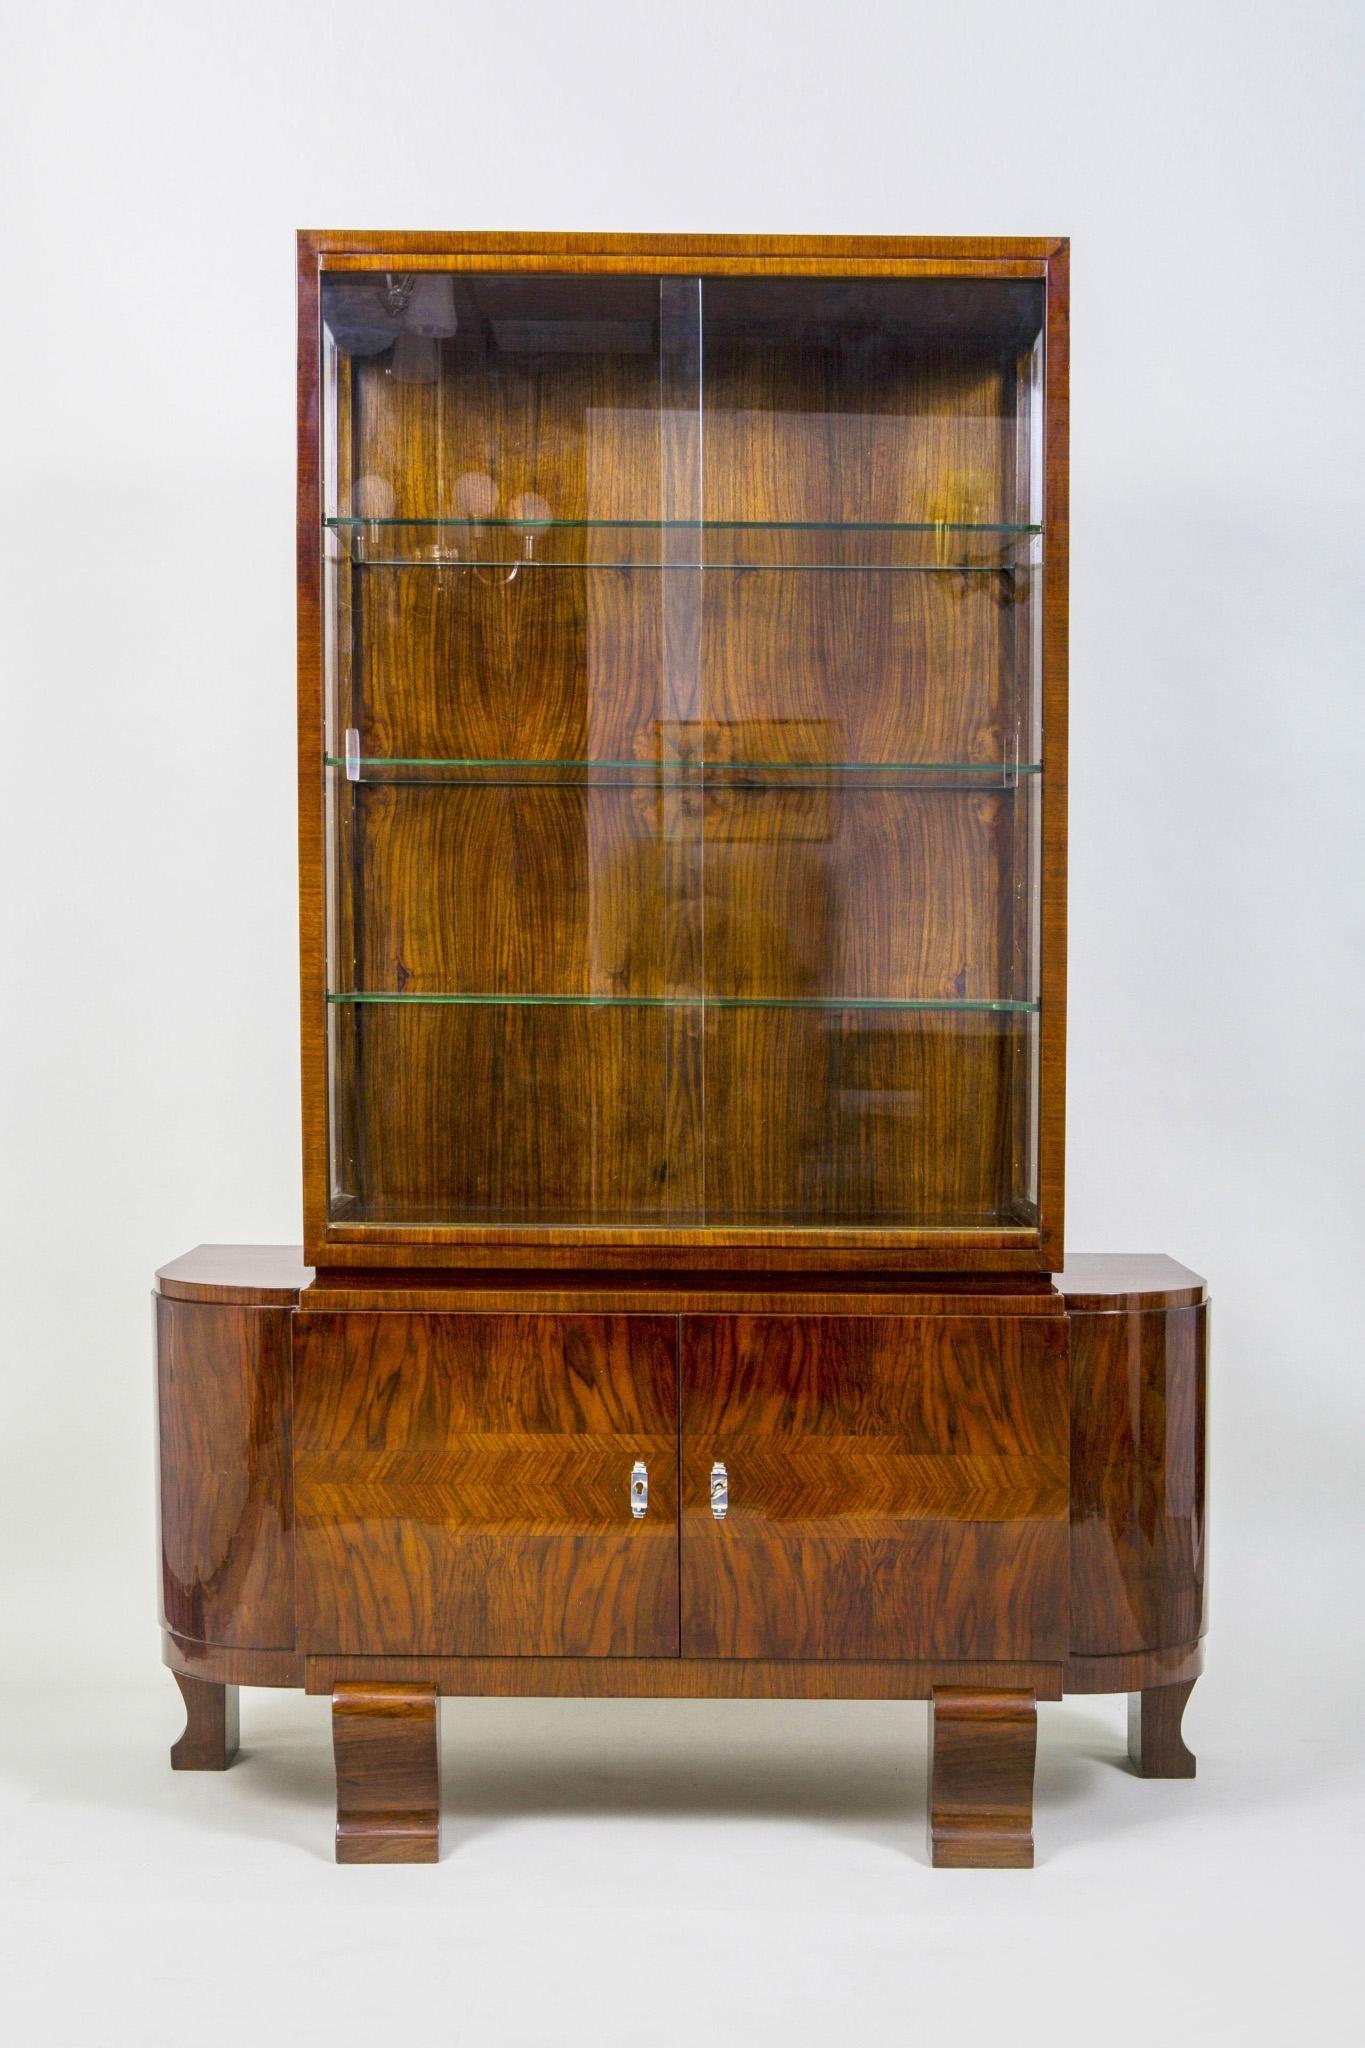 20th century Art Deco display cabinet
Completely restored to the high gloss.
Material: Walnut.